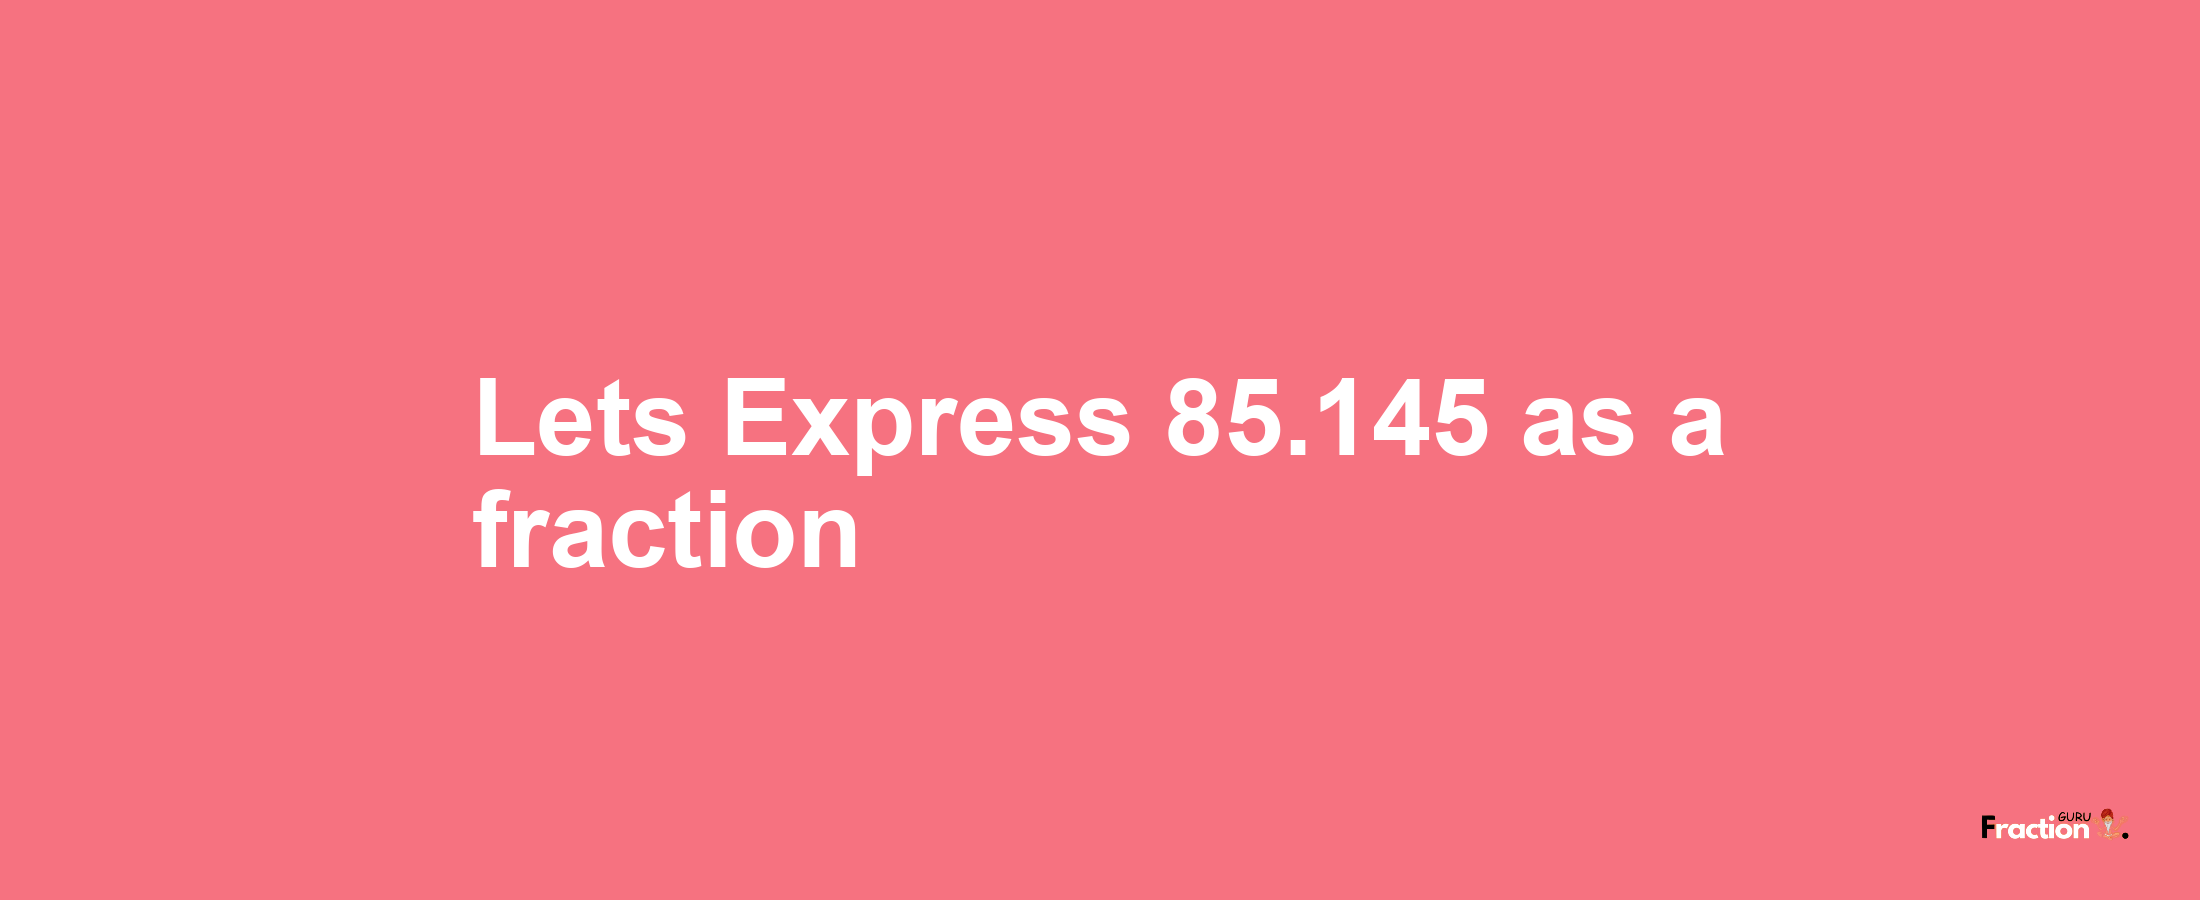 Lets Express 85.145 as afraction